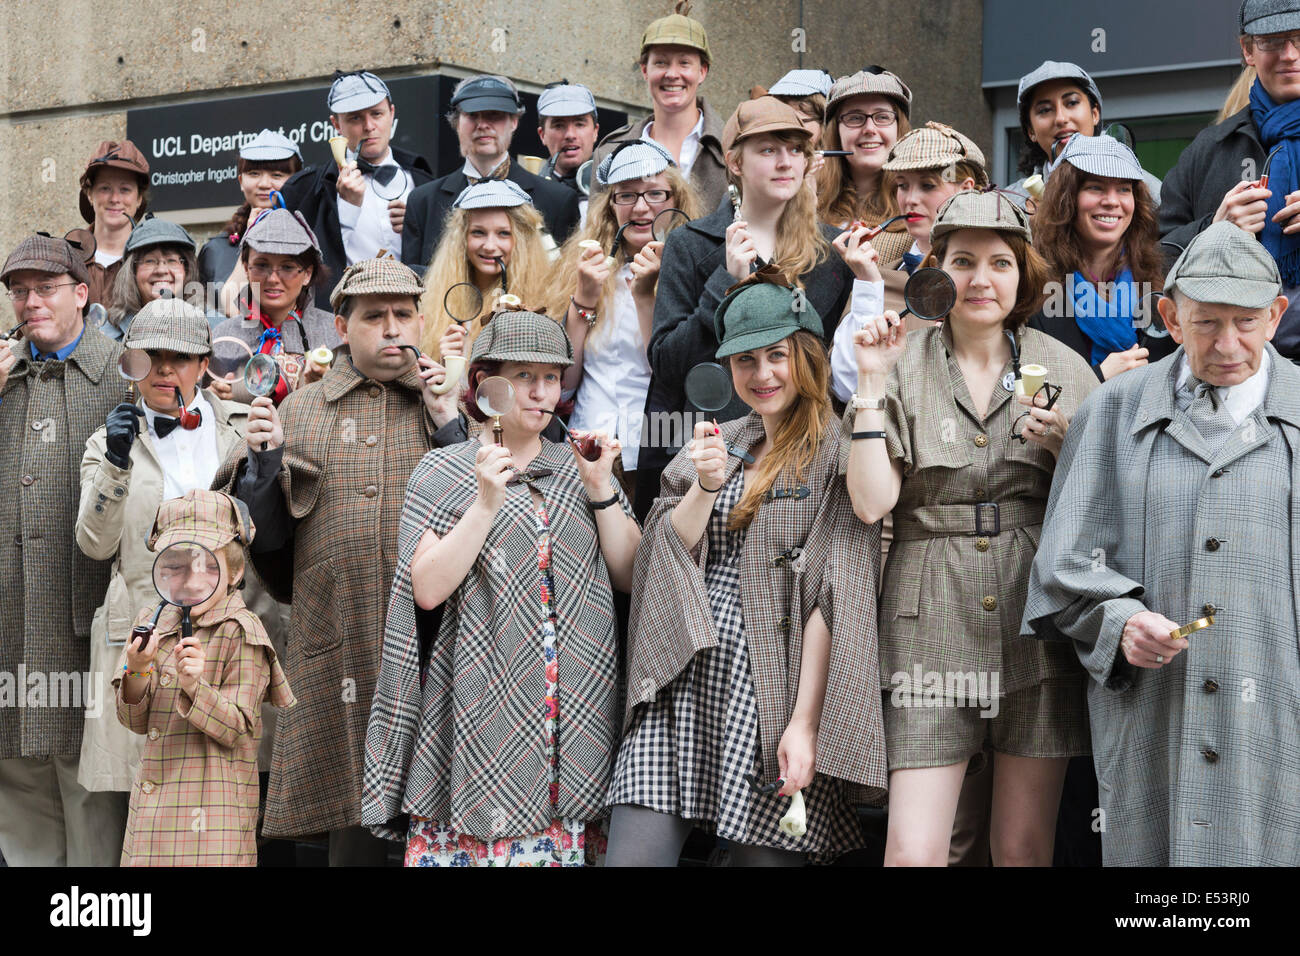 Dozens of fans dressed as Sherlock Holmes created by Sir Arthur Conan Doyle in a Guinness World Record Attempt in London. Stock Photo